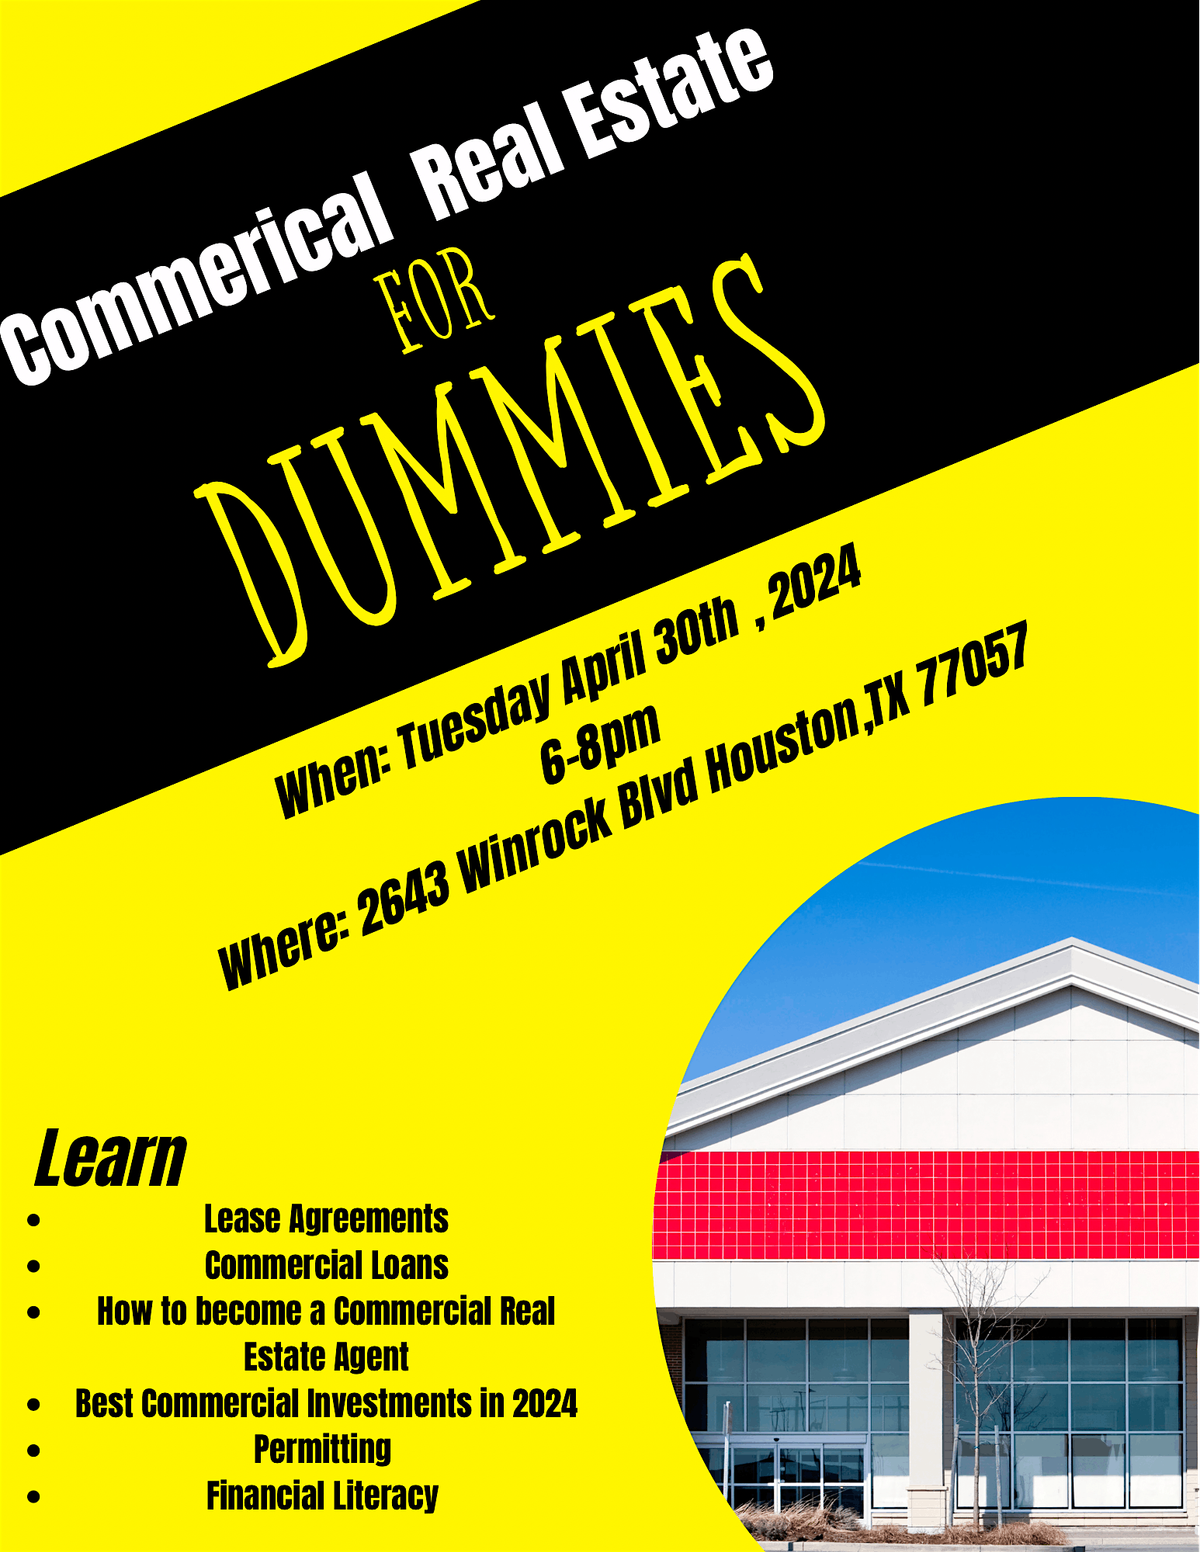 COMMERCIAL REAL ESTATE FOR DUMMIES